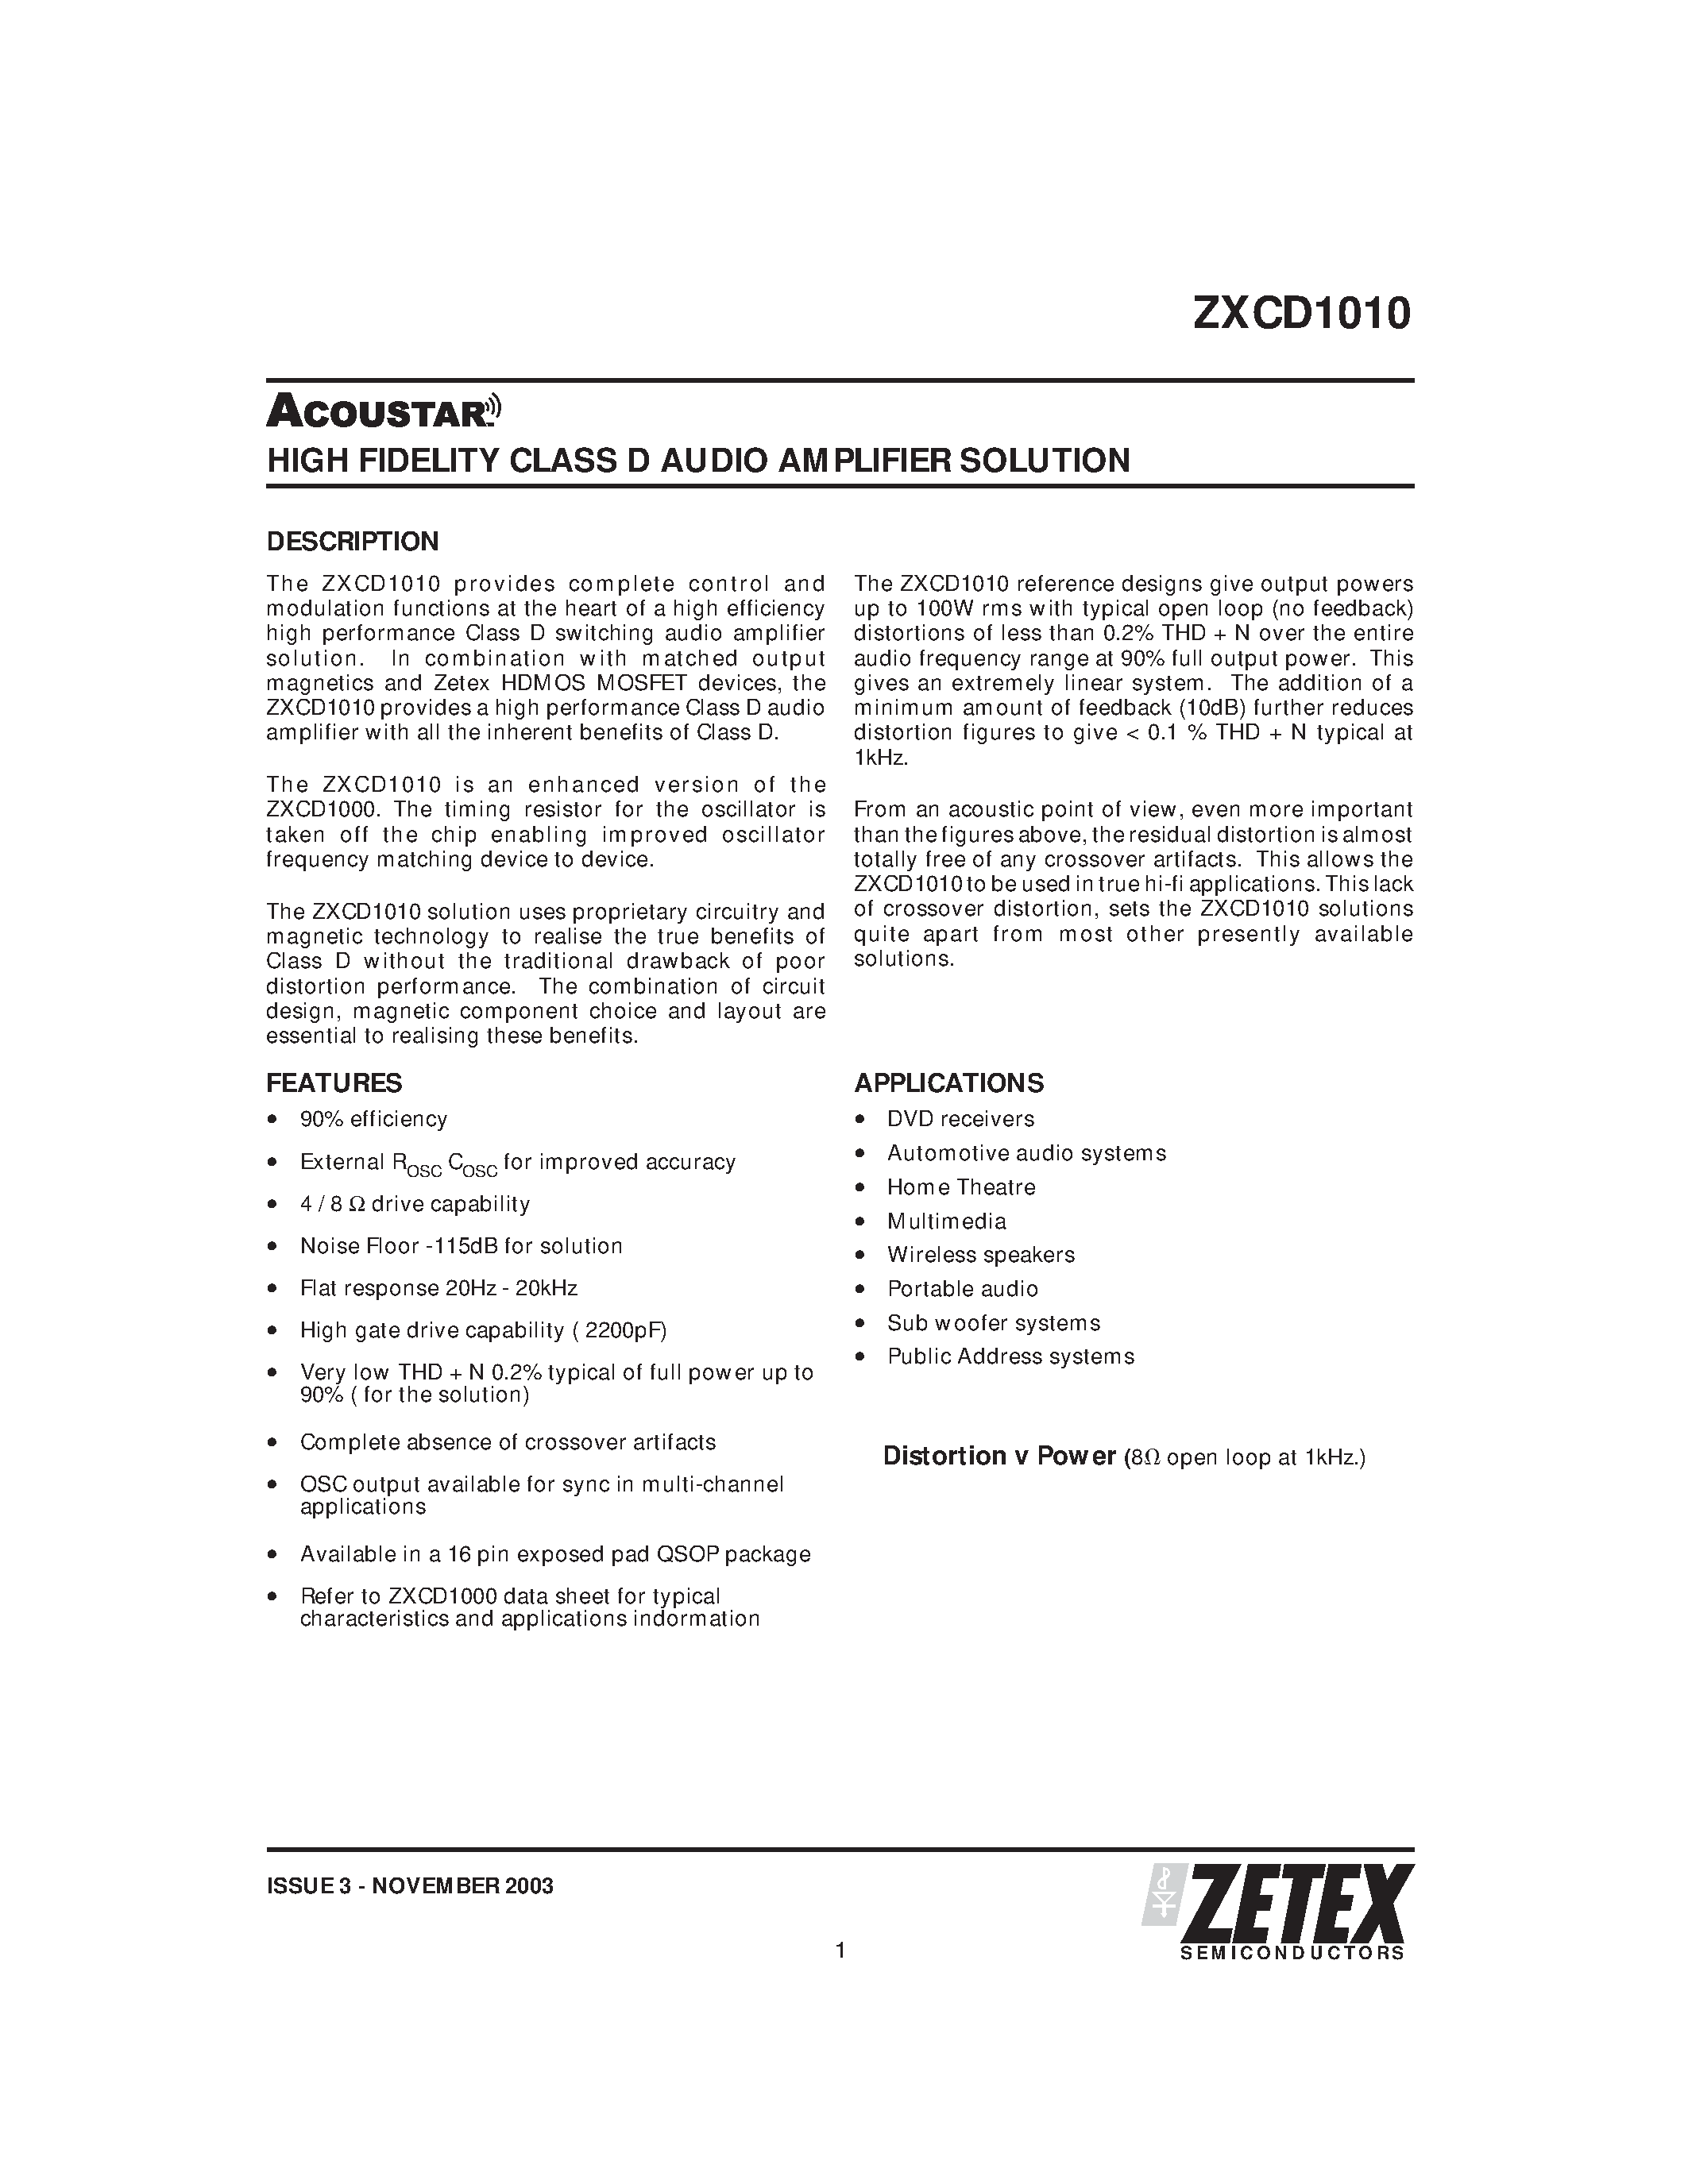 Datasheet ZXCD1010 - HIGH FIDELITY CLASS D AUDIO AMPLIFIER SOLUTION page 1